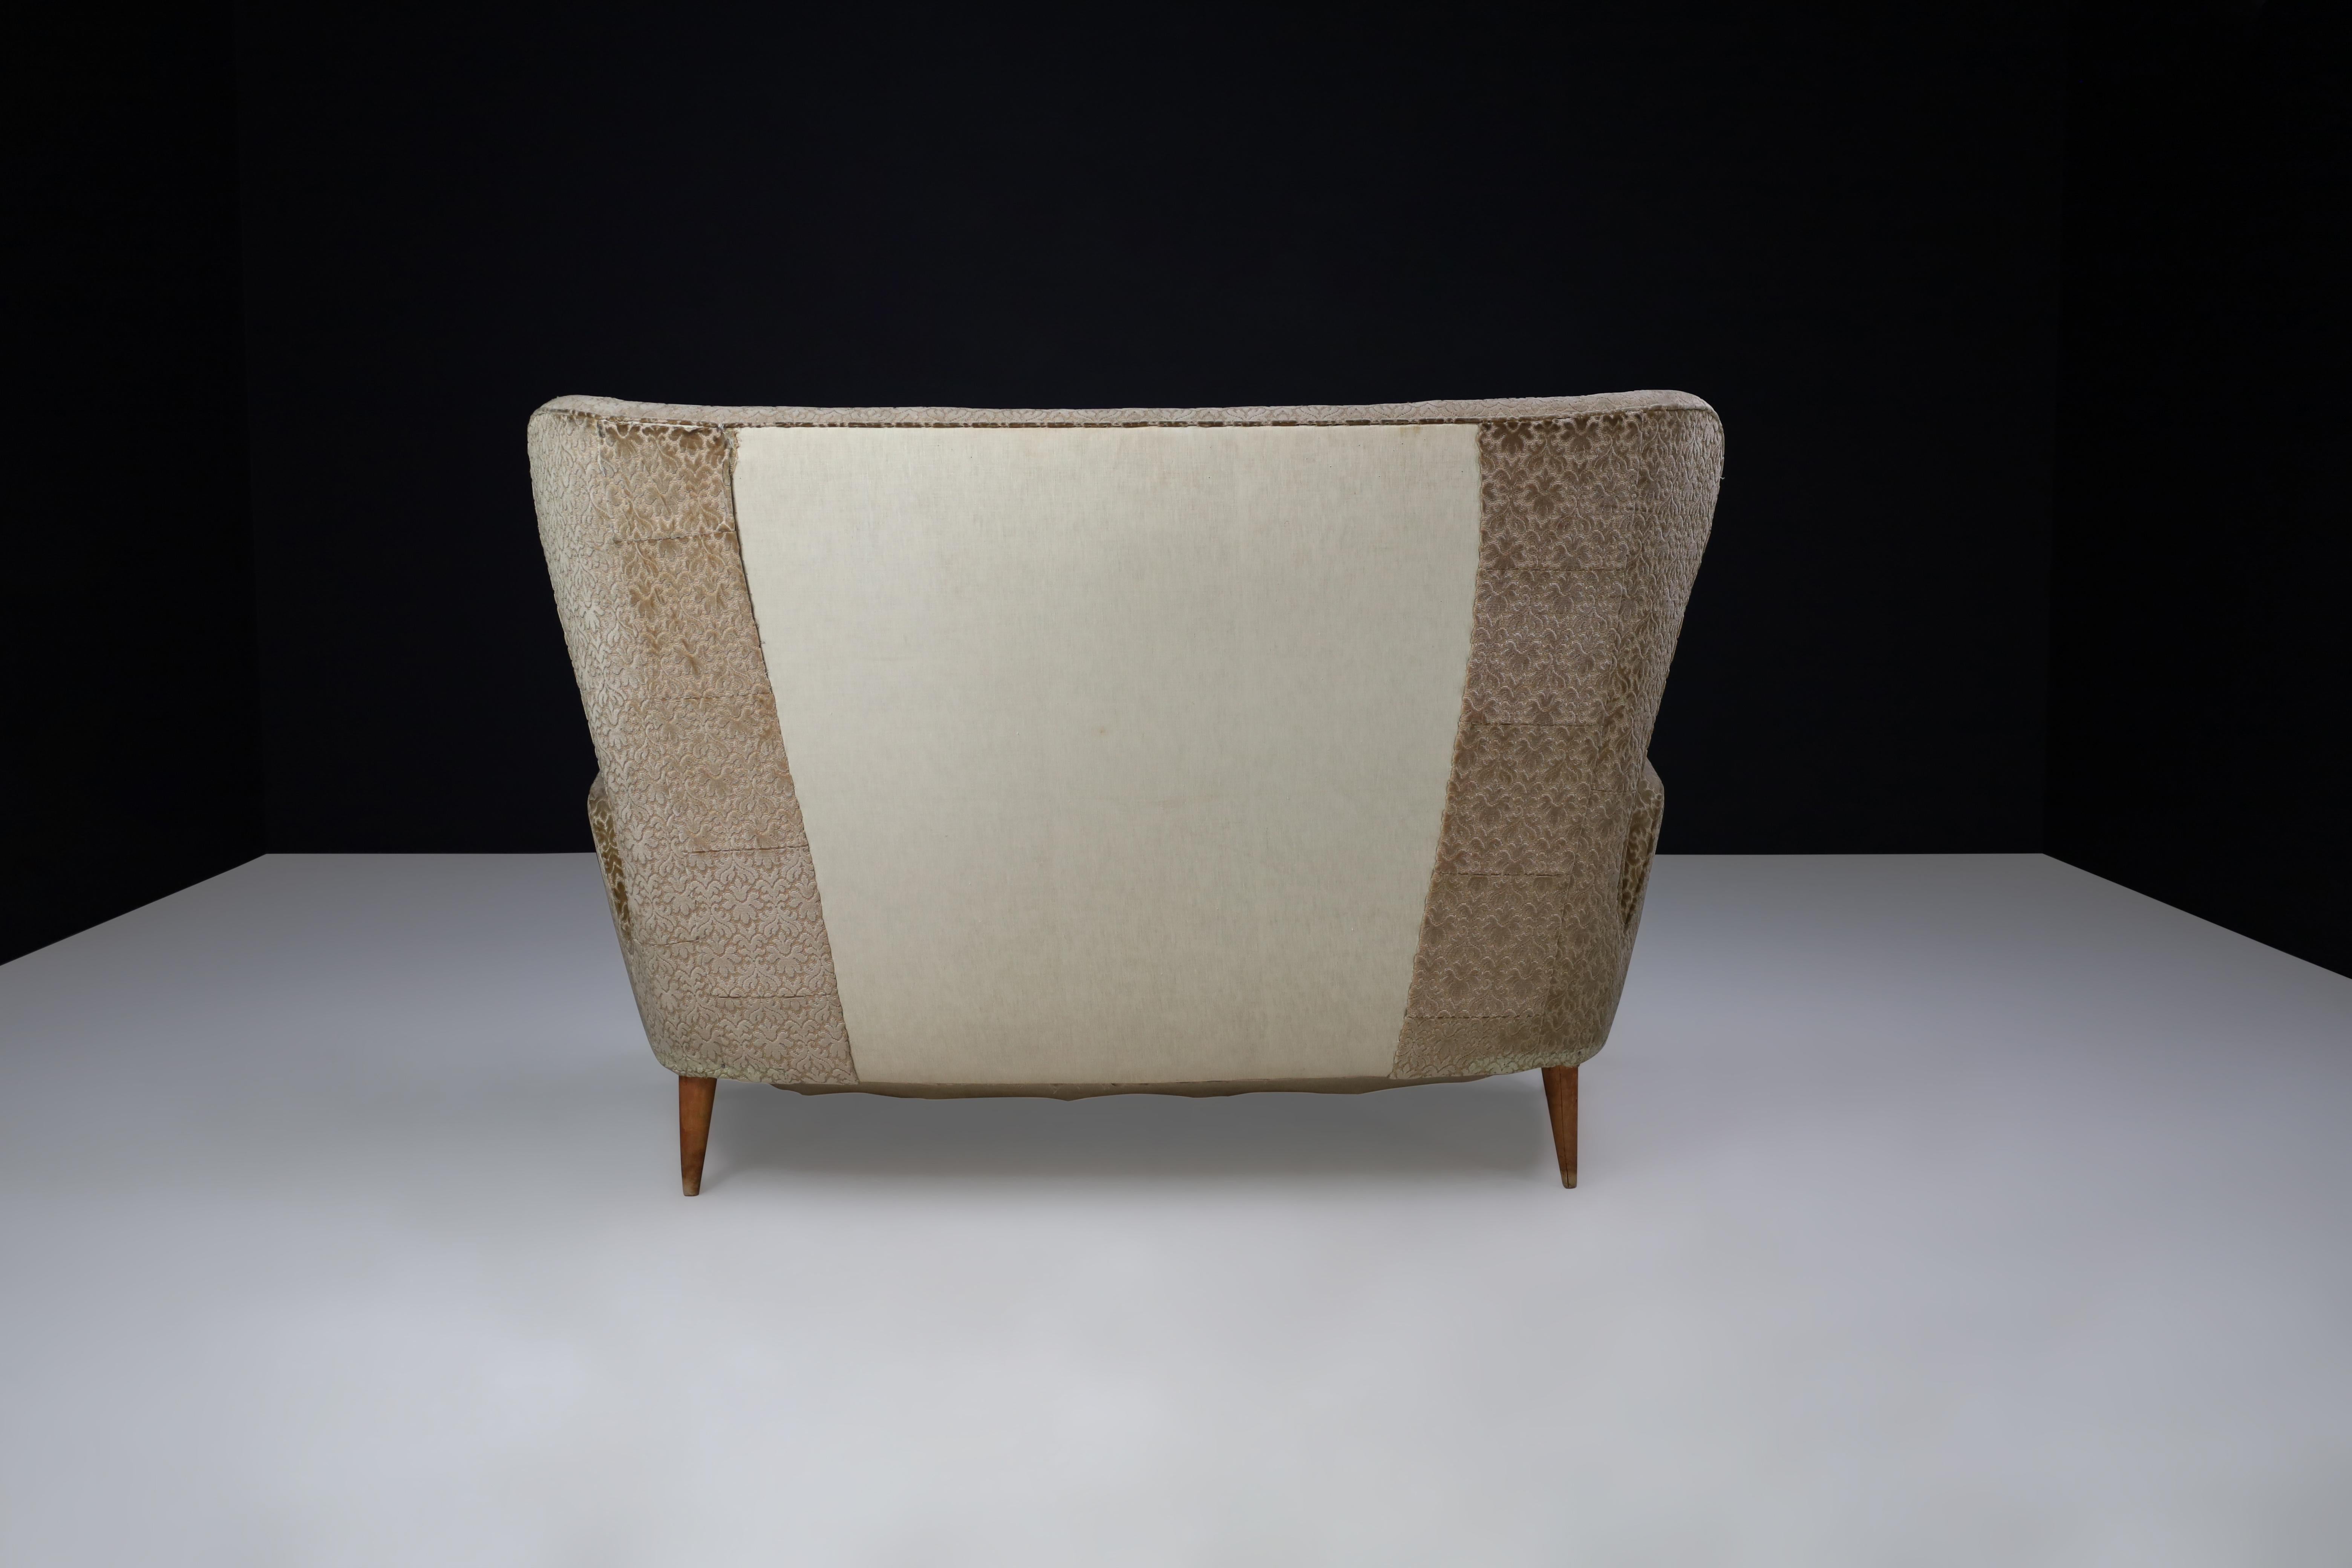 Emilio Sala and Giorgio Madini, Sofa with Tapered Wooden Legs Italy, 1950s For Sale 1